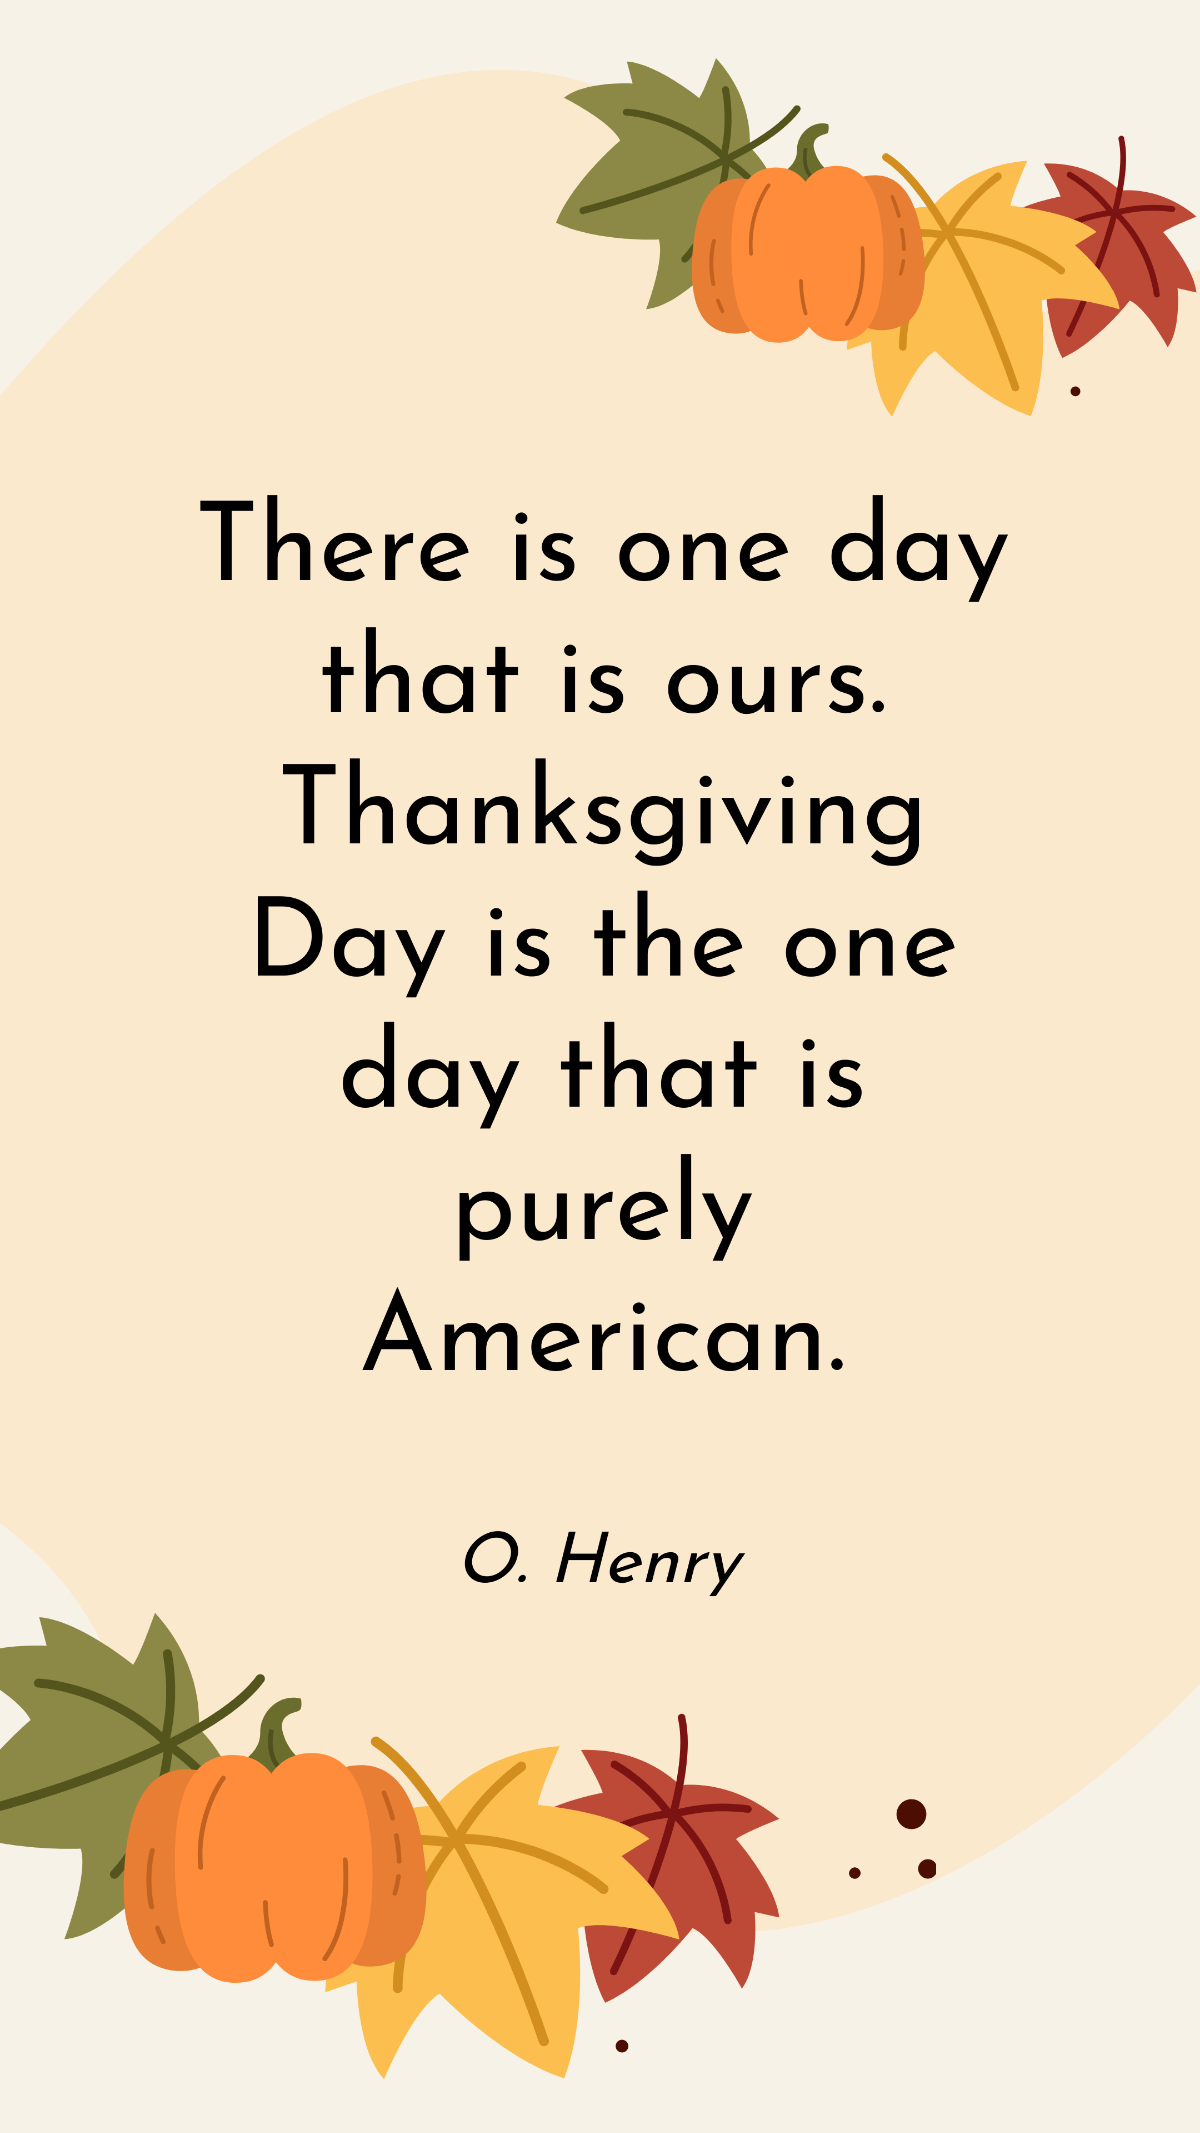 O. Henry - There is one day that is ours. Thanksgiving Day is the one day that is purely American. Template